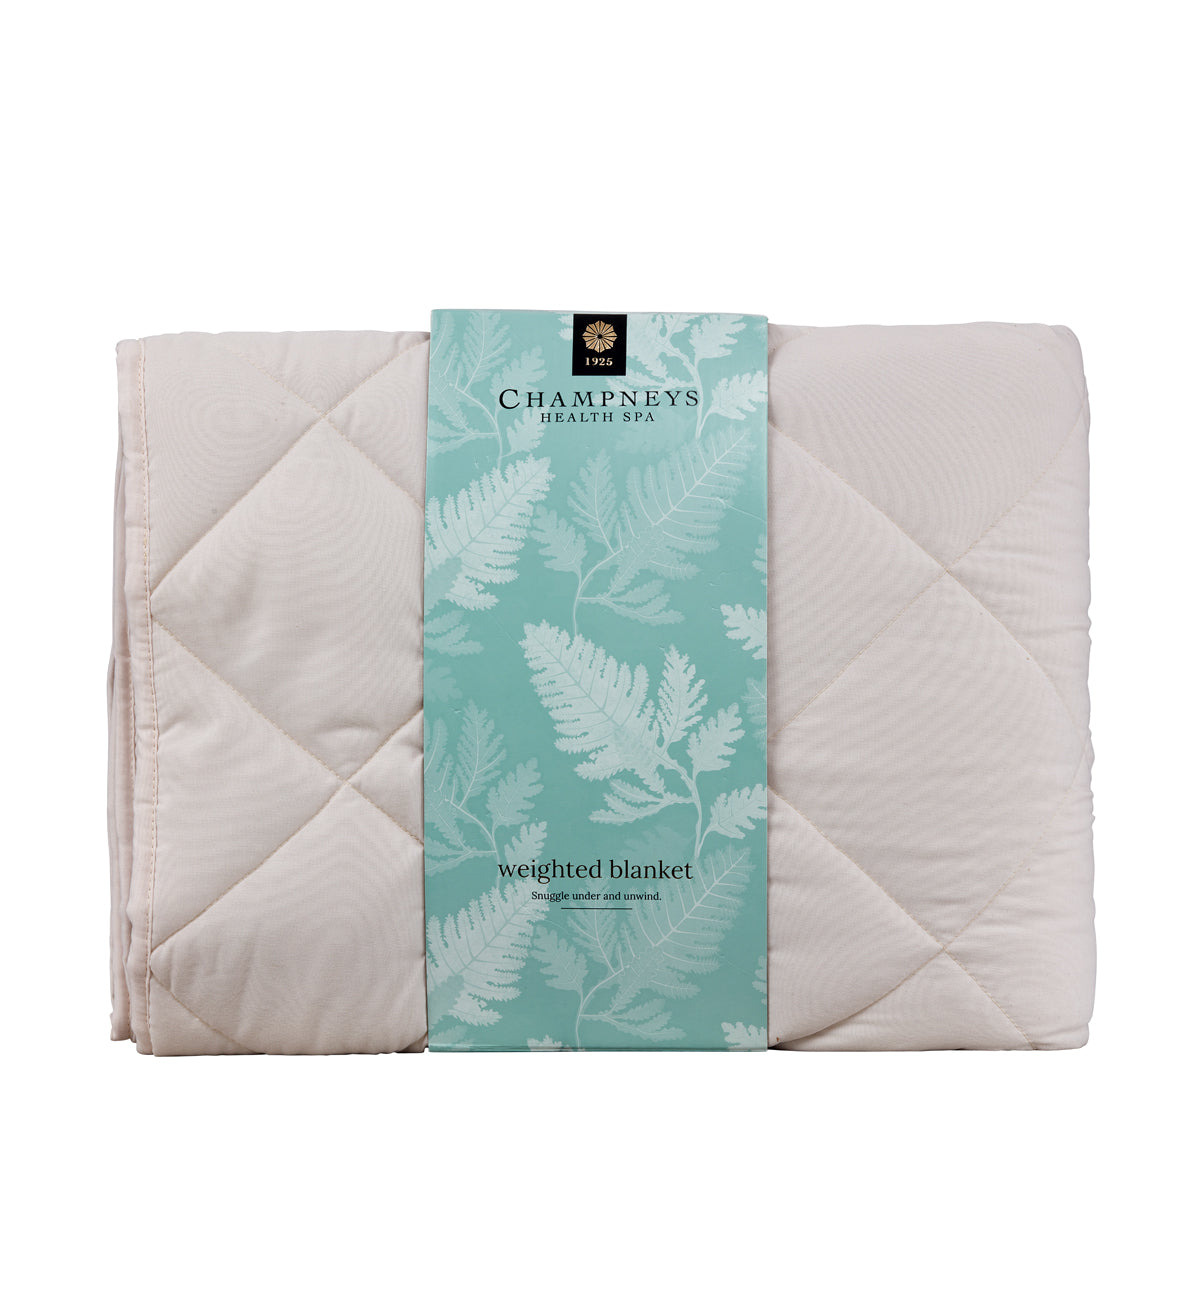 Champneys Weighted Blanket Gift